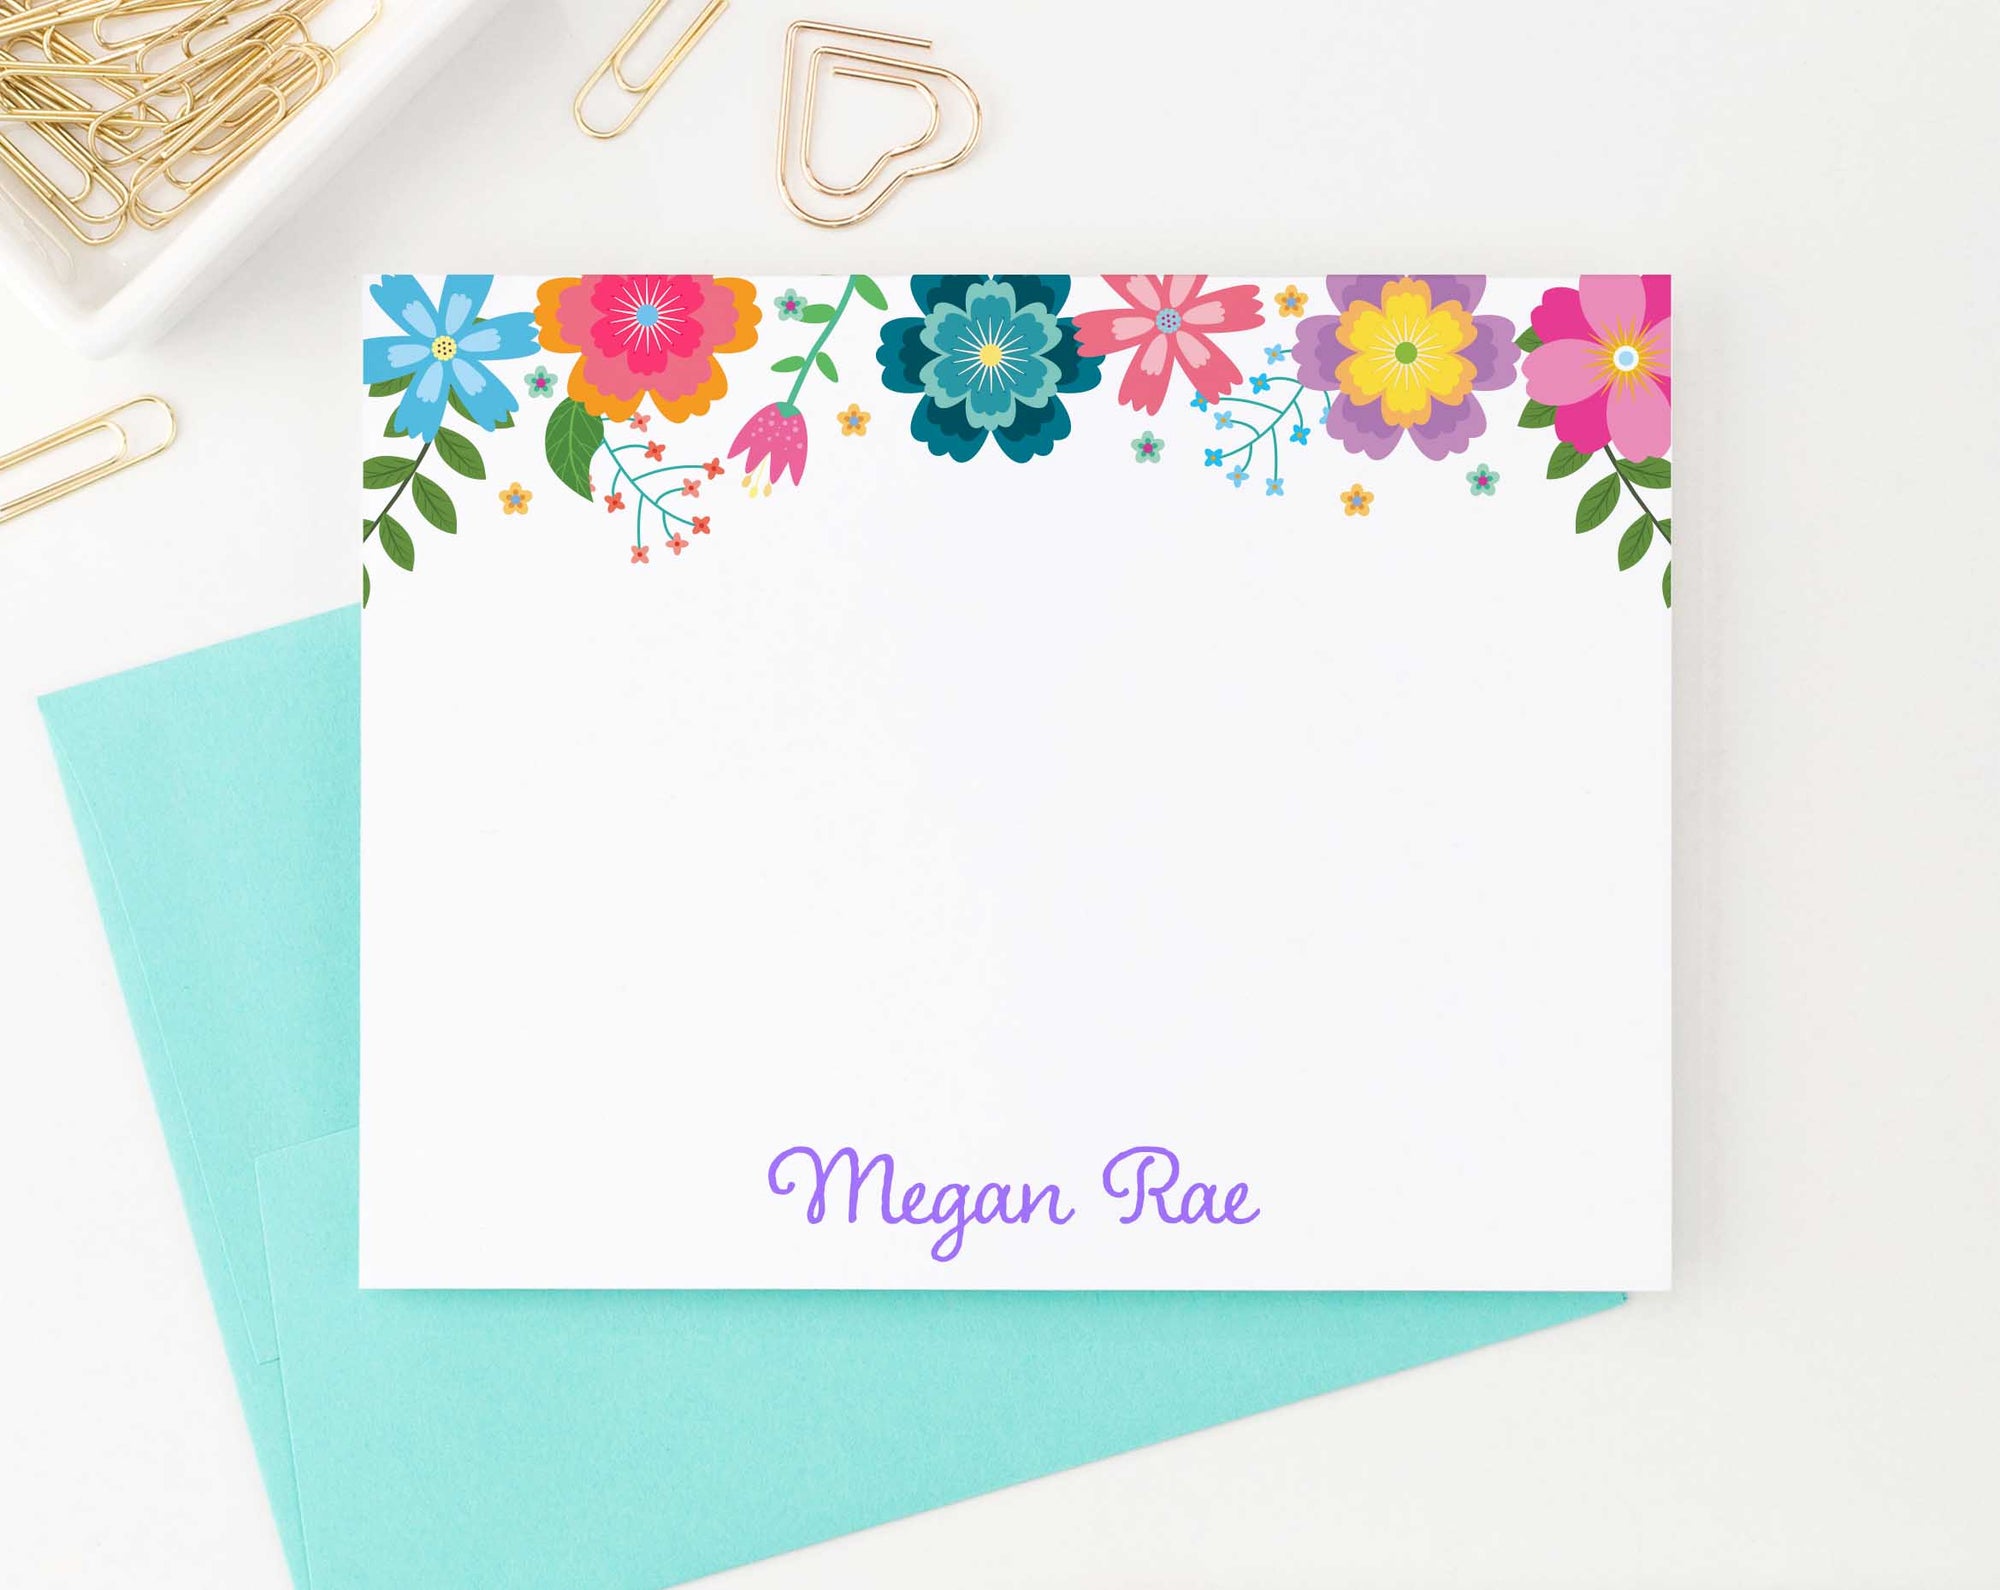 KS144 colorful floral stationery personalized note cards for girls kids flowers florals bright vibrant elegant 3